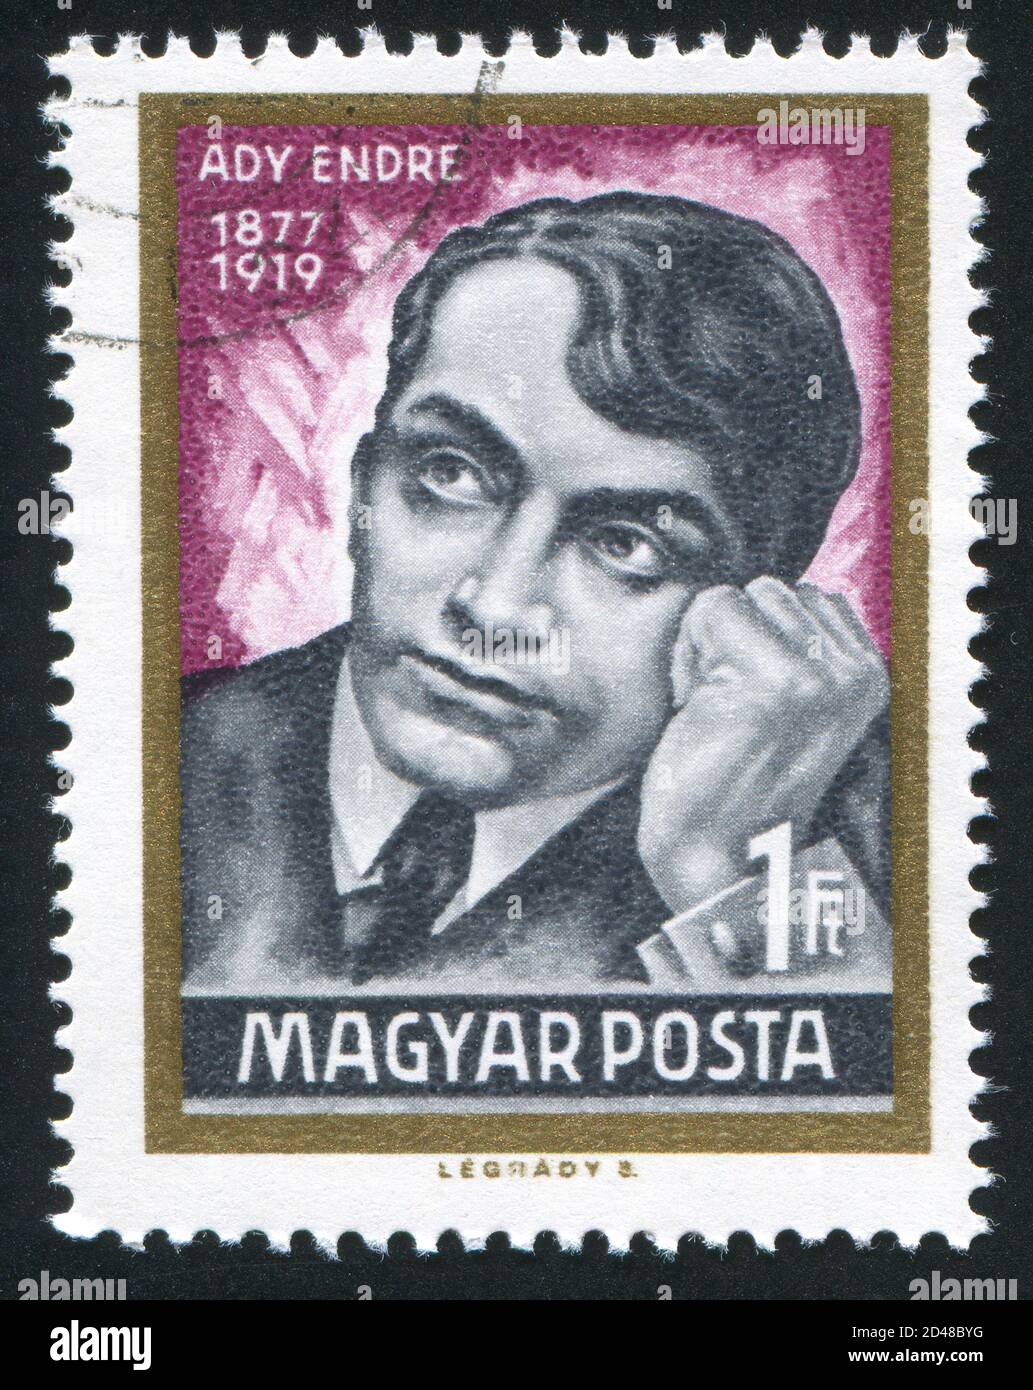 HUNGARY - CIRCA 1969: stamp printed by Hungary, shows Endre Ady, circa 1969 Stock Photo